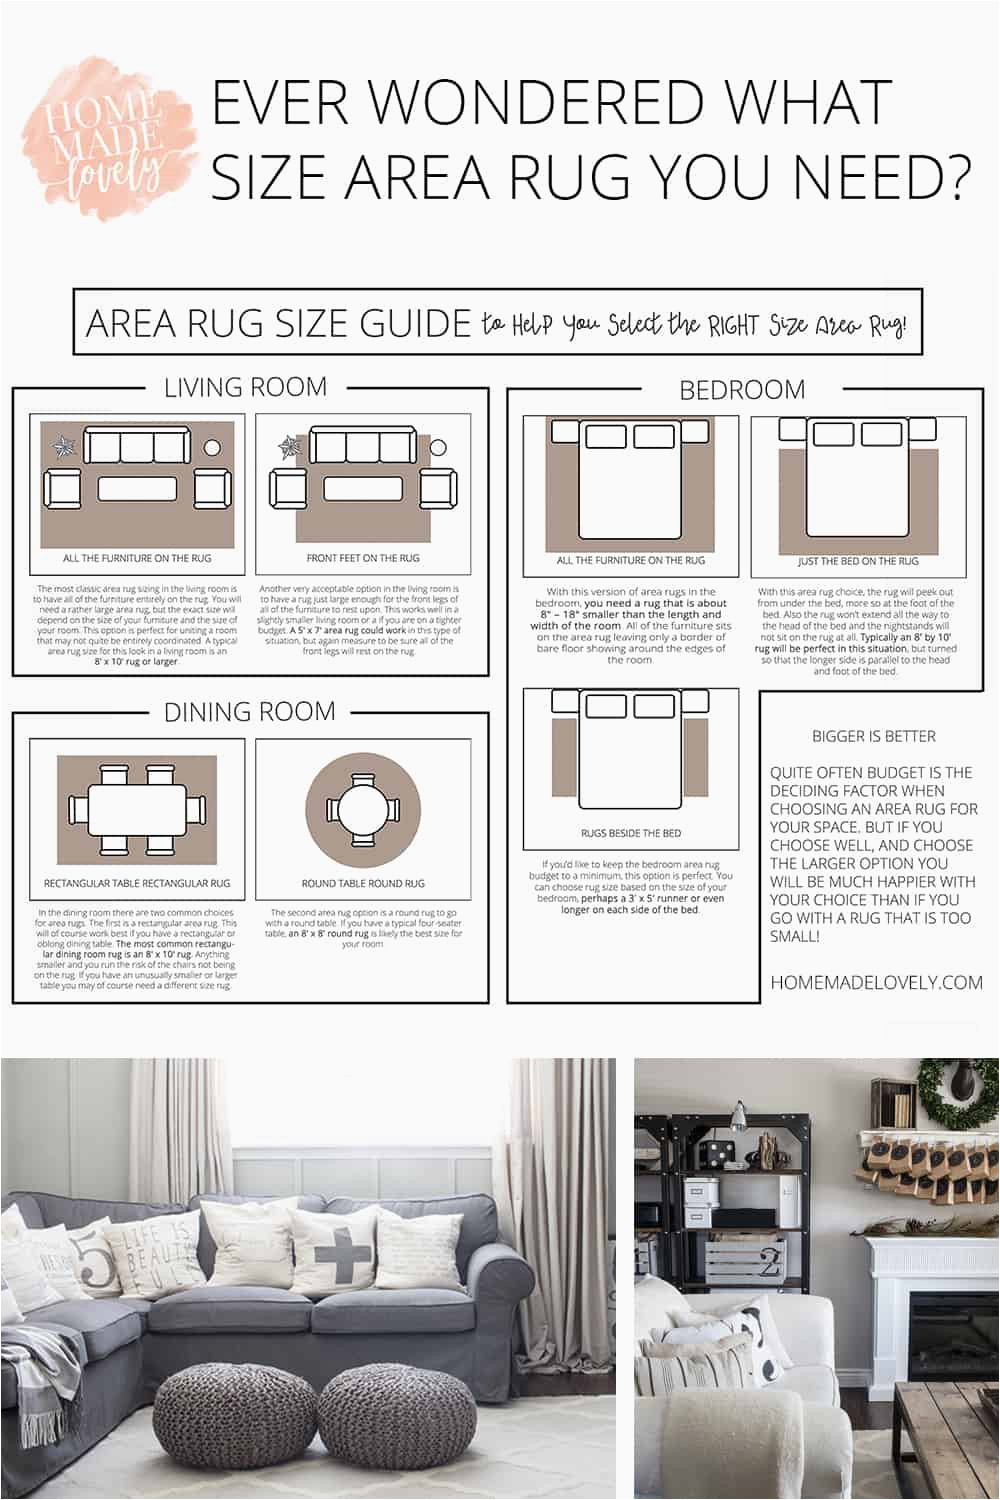 AREA RUG SIZE GUIDE pin